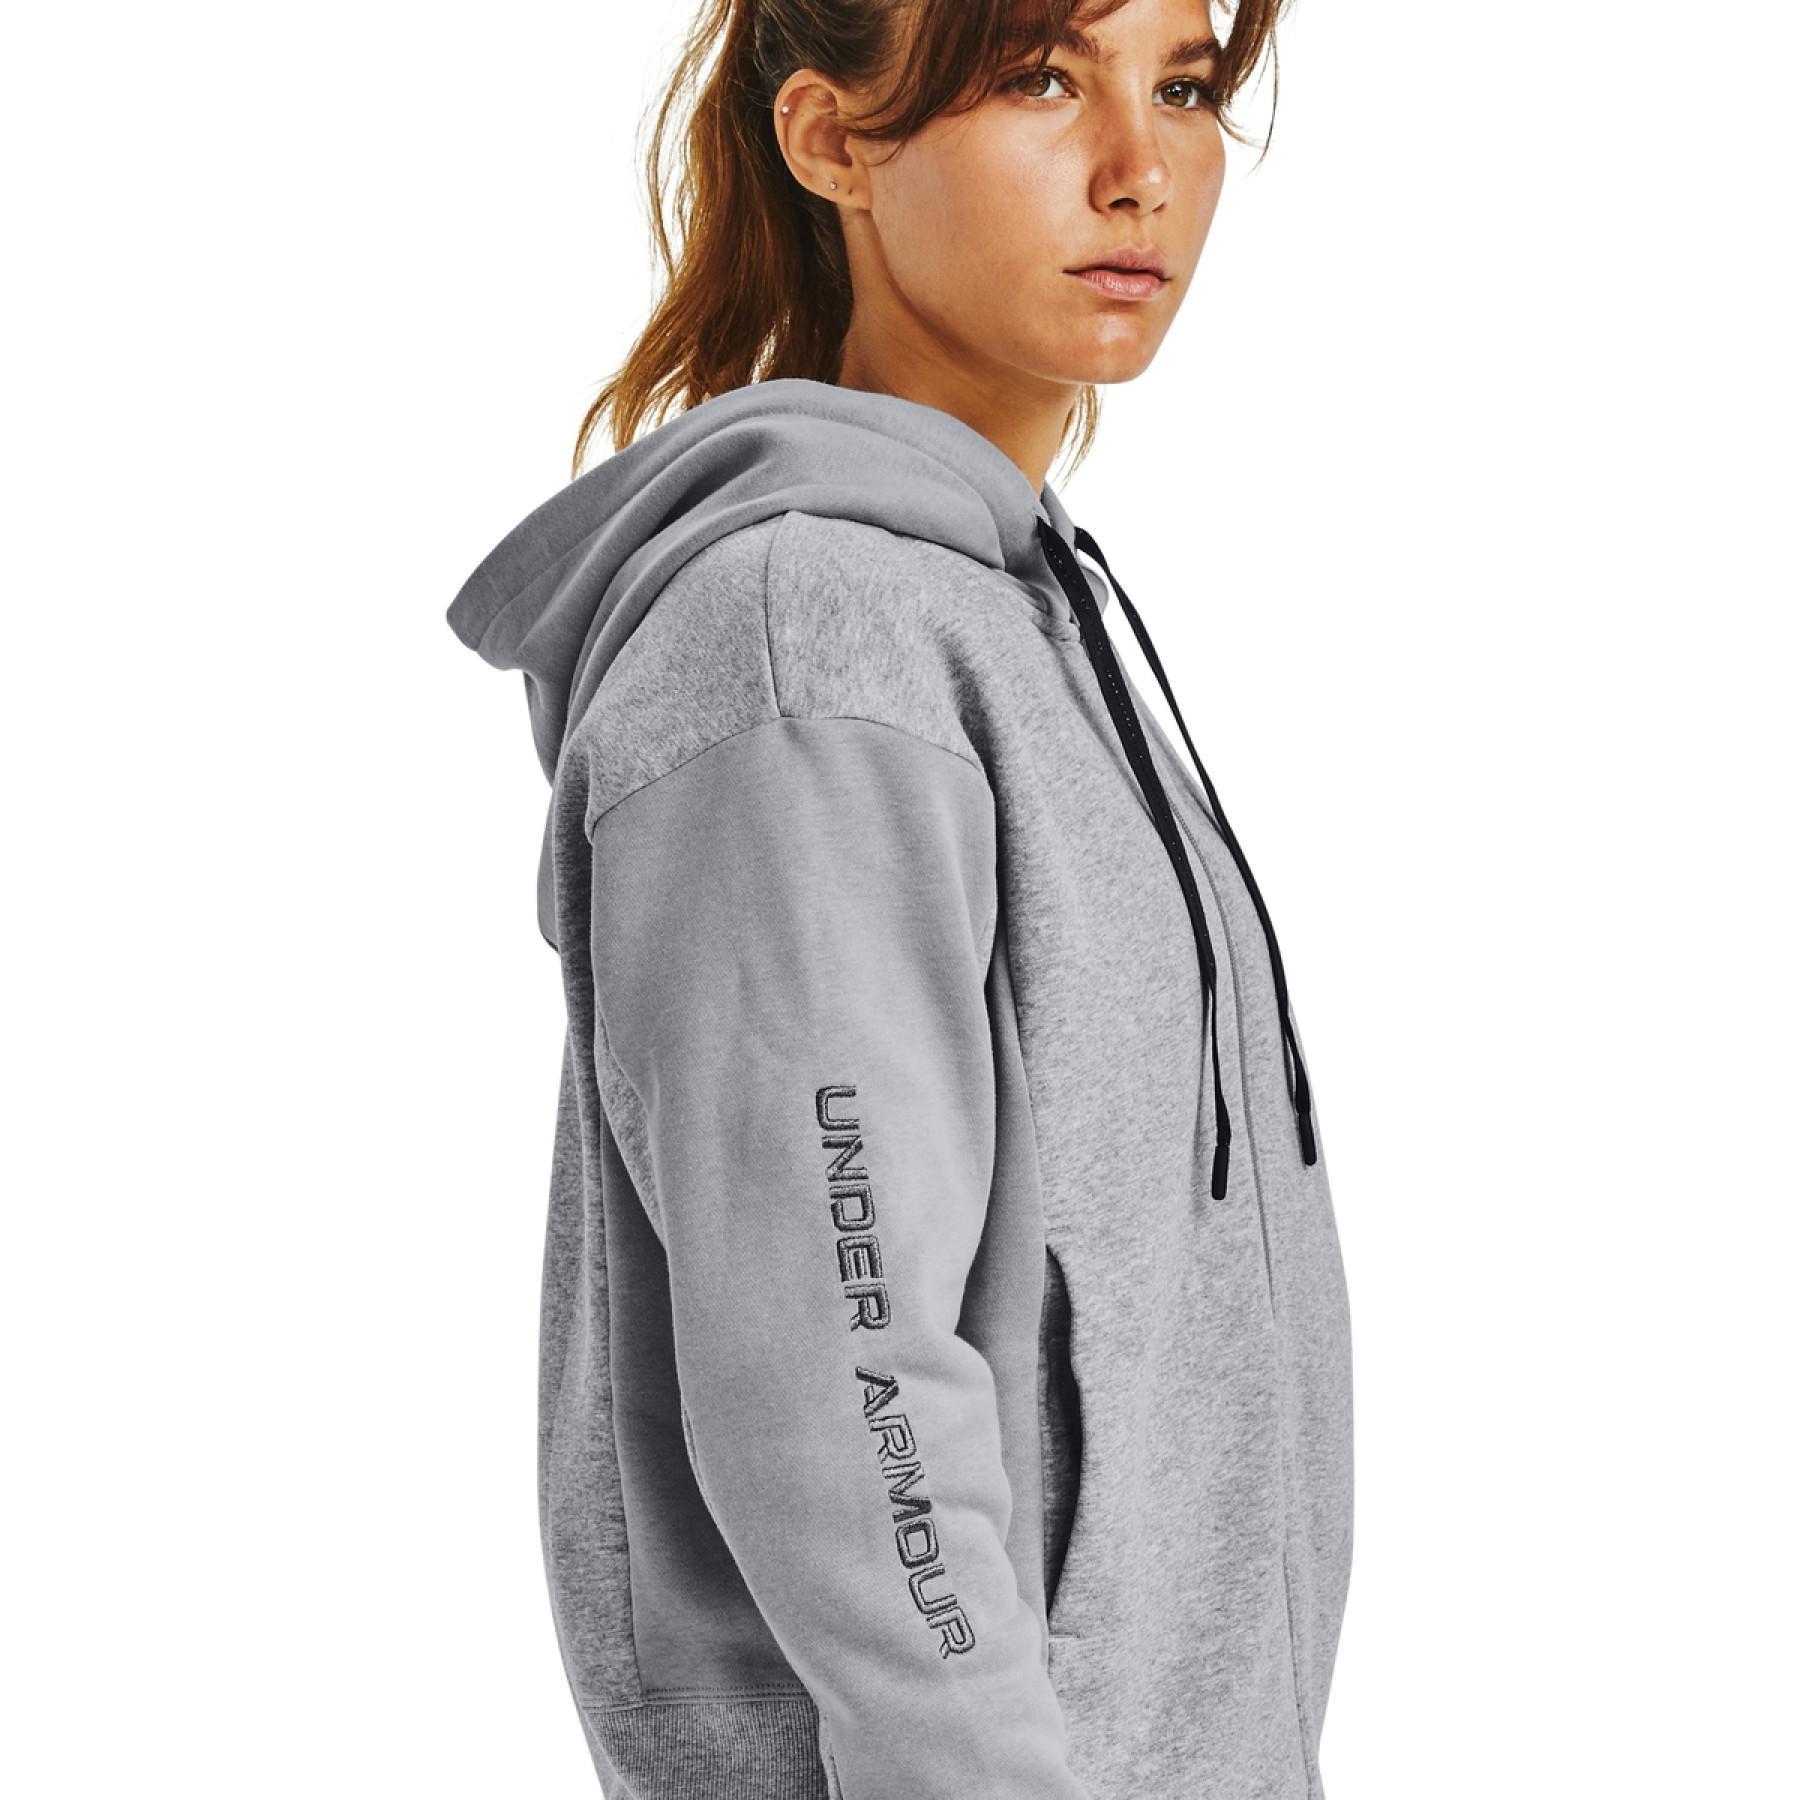 Sudadera con capucha para mujer Under Armour Rival Fleece Embroidered Full Zip